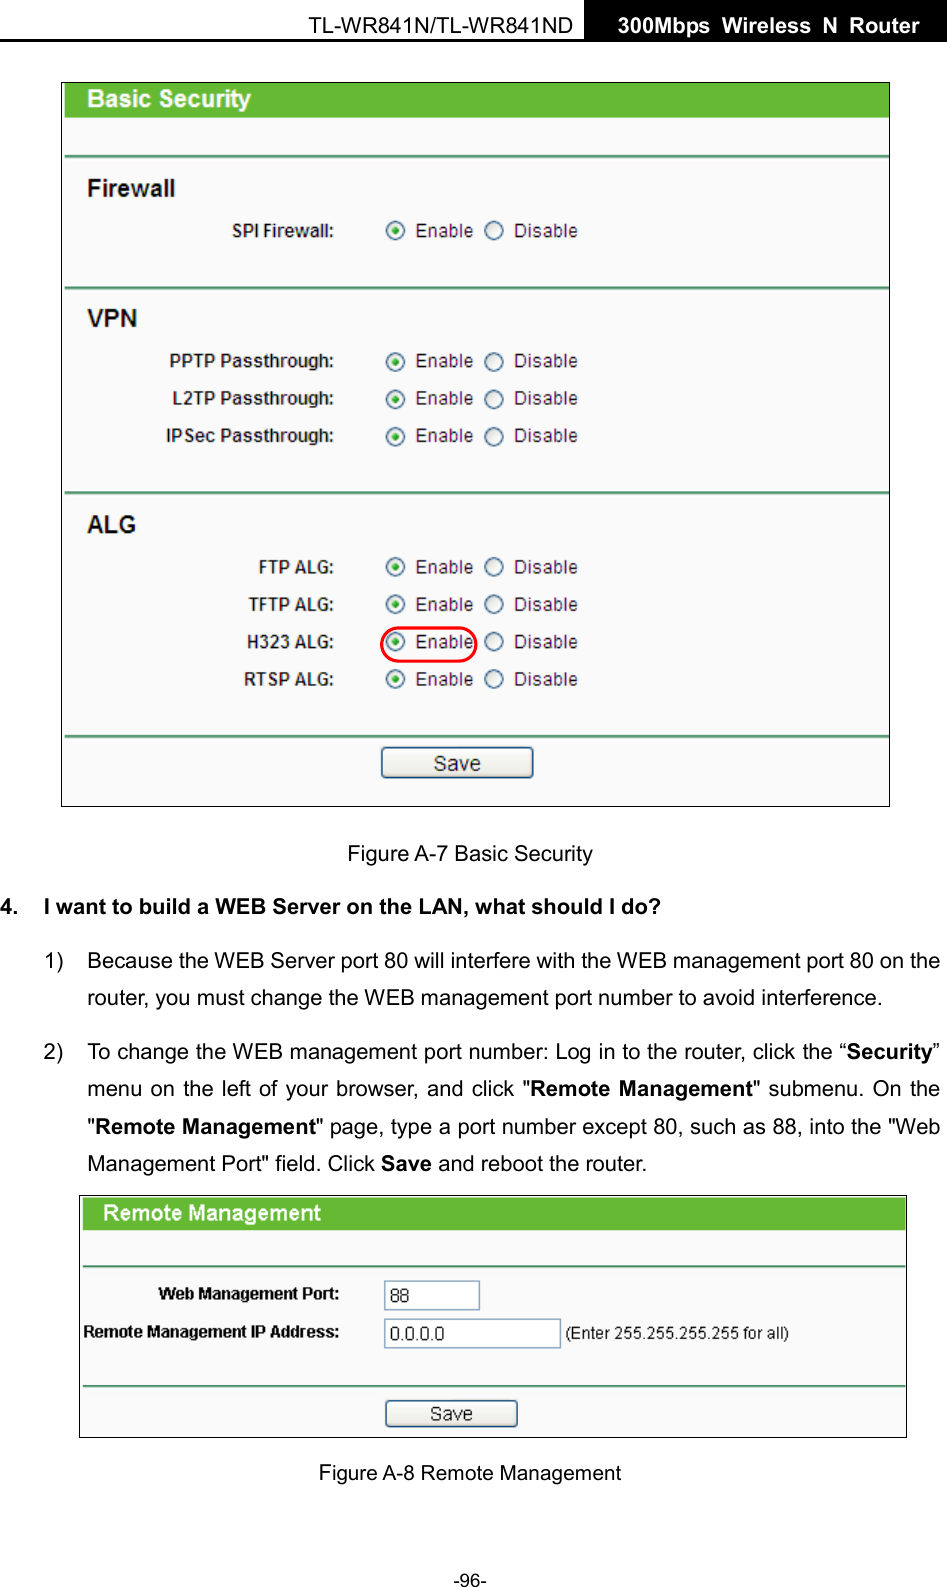  TL-WR841N/TL-WR841ND  300Mbps Wireless N  Router       Figure A-7 Basic Security 4. I want to build a WEB Server on the LAN, what should I do? 1) Because the WEB Server port 80 will interfere with the WEB management port 80 on the router, you must change the WEB management port number to avoid interference. 2) To change the WEB management port number: Log in to the router, click the “Security” menu on the left of your browser, and click &quot;Remote Management&quot; submenu. On the &quot;Remote Management&quot; page, type a port number except 80, such as 88, into the &quot;Web Management Port&quot; field. Click Save and reboot the router.  Figure A-8 Remote Management -96- 